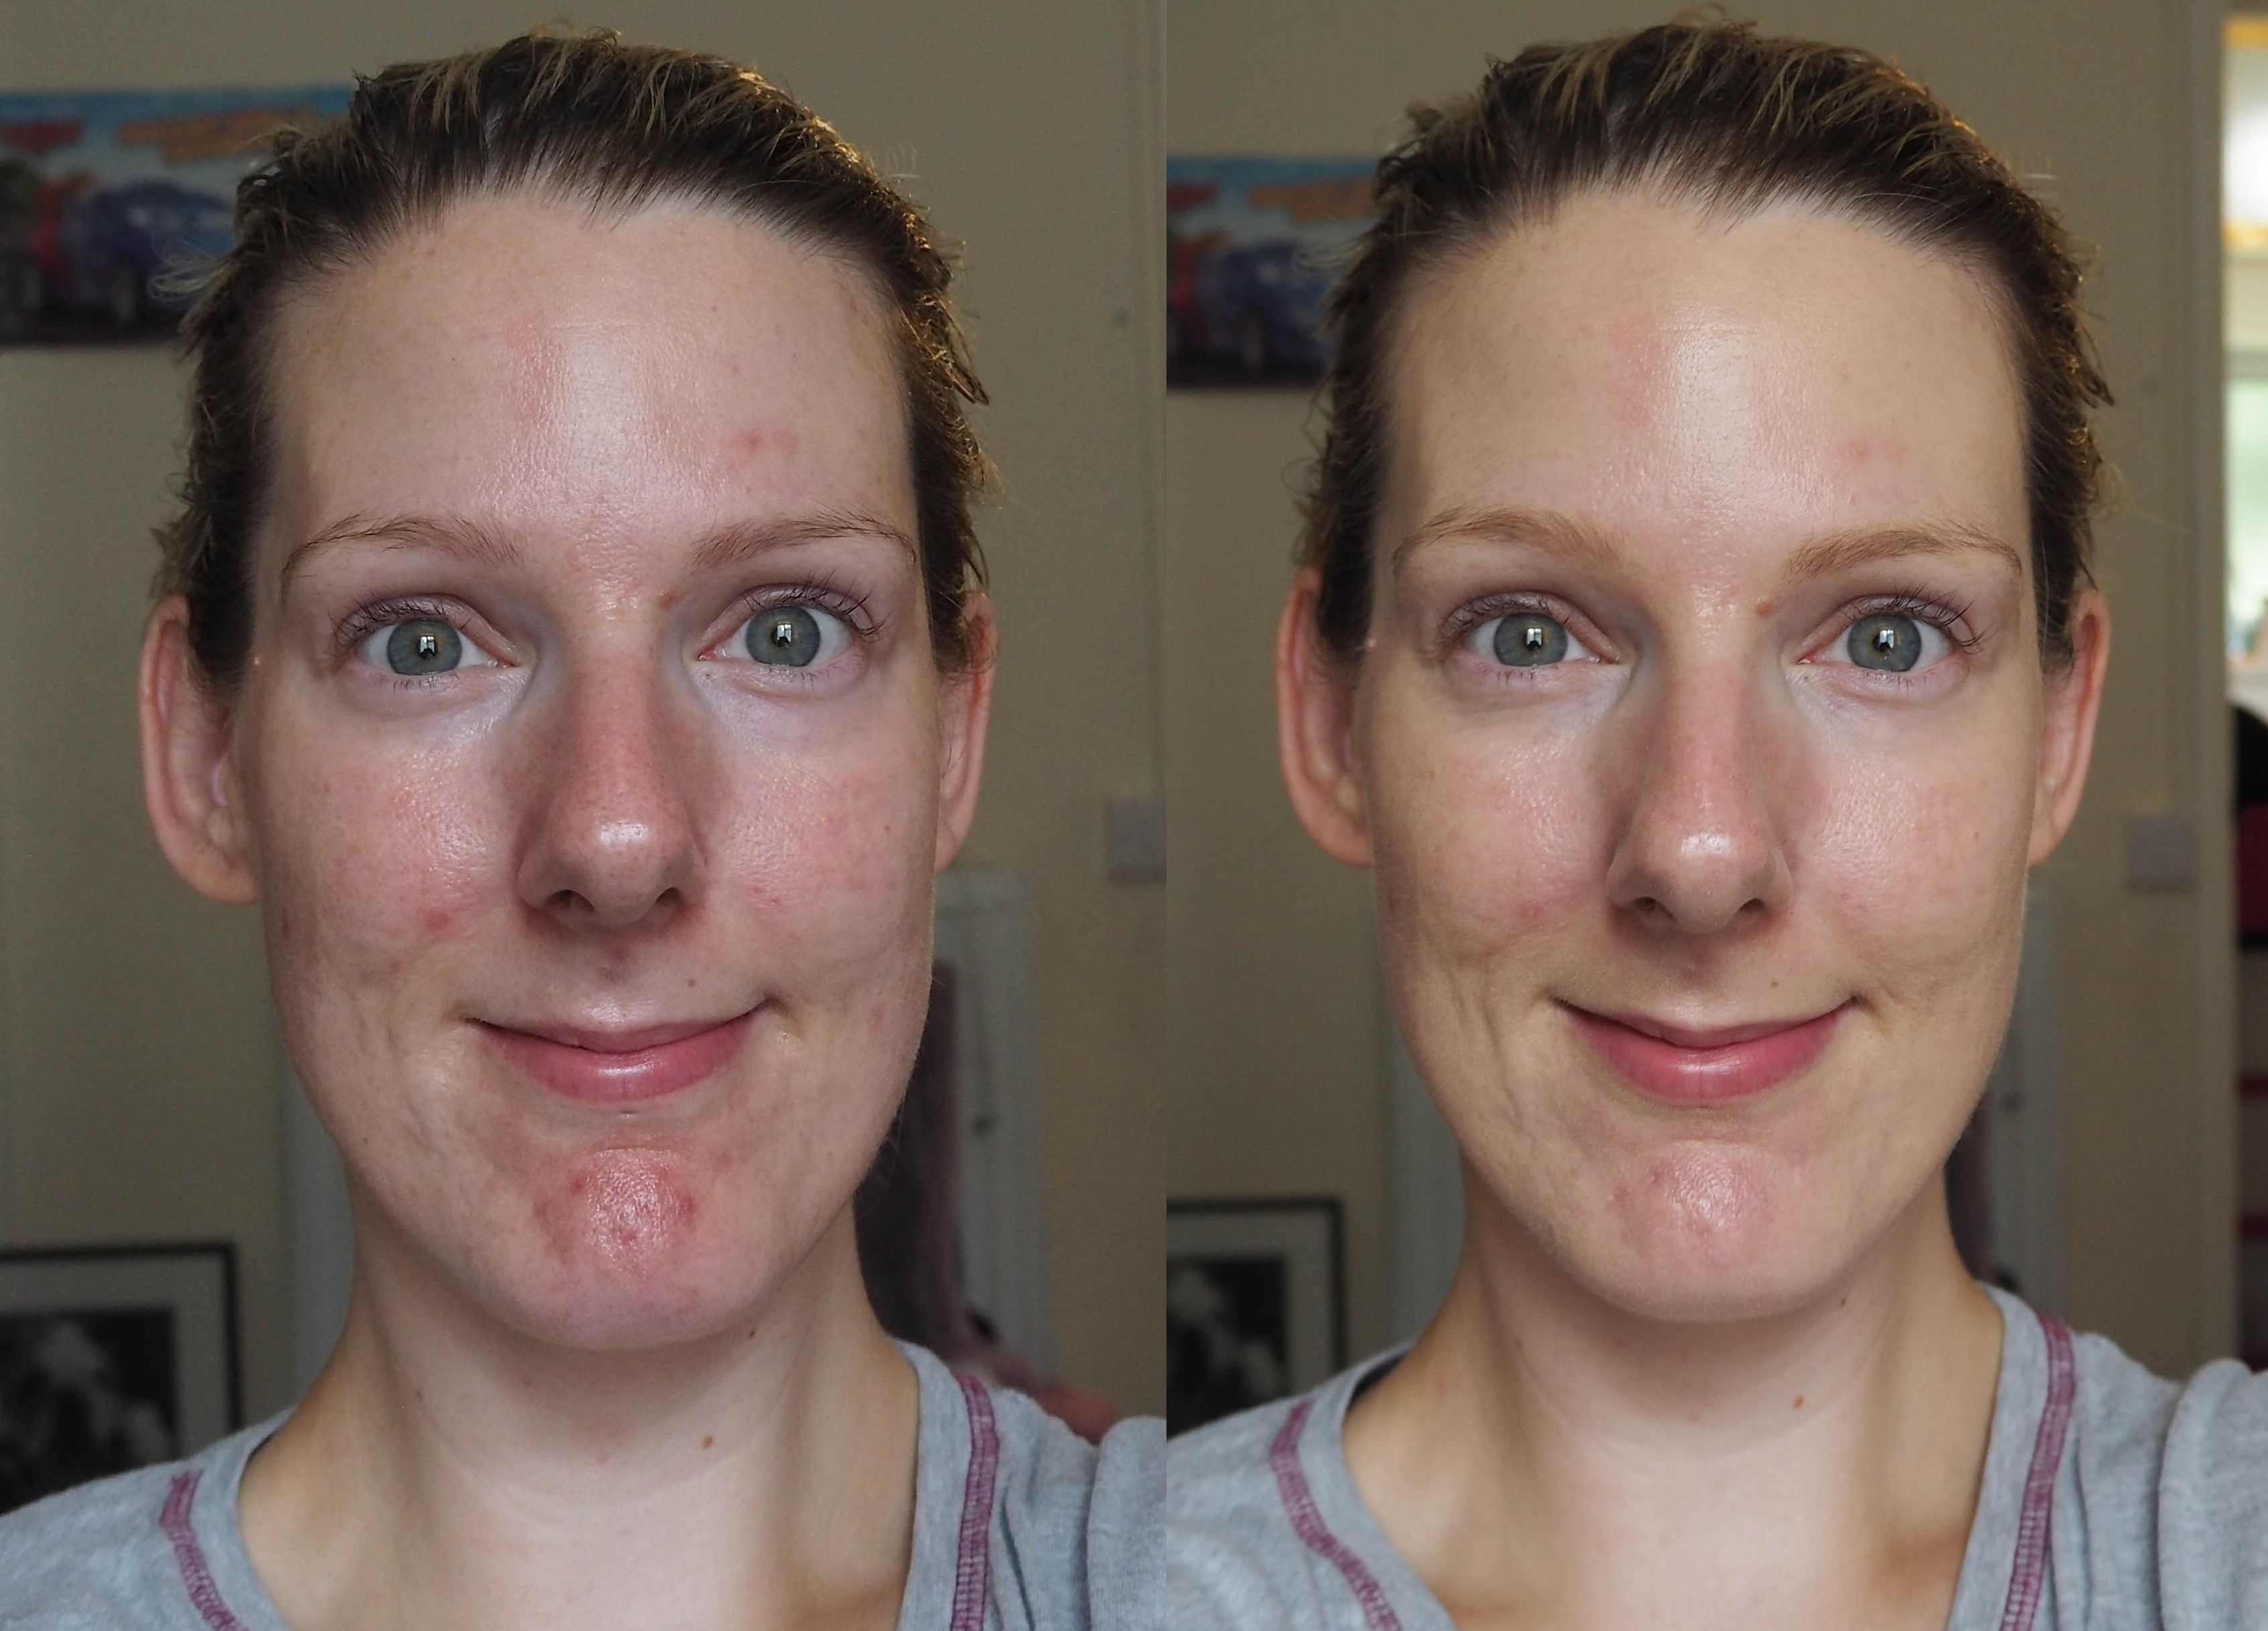 Revlon Photoready Candid Foundation before and after face pictures